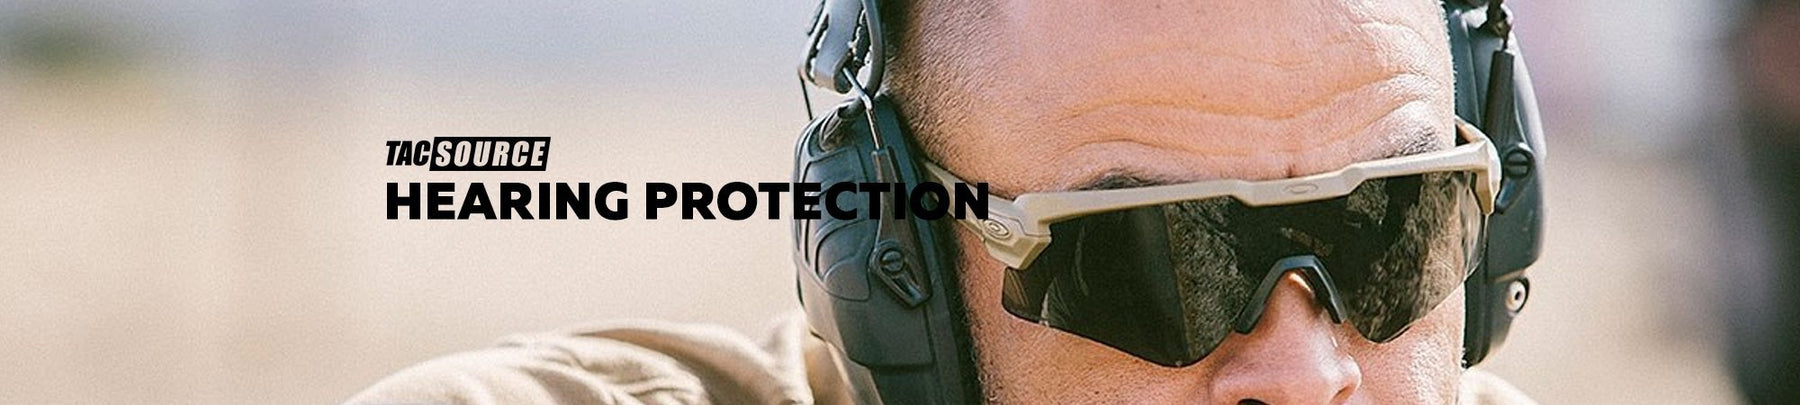 Hearing Protection-TacSource